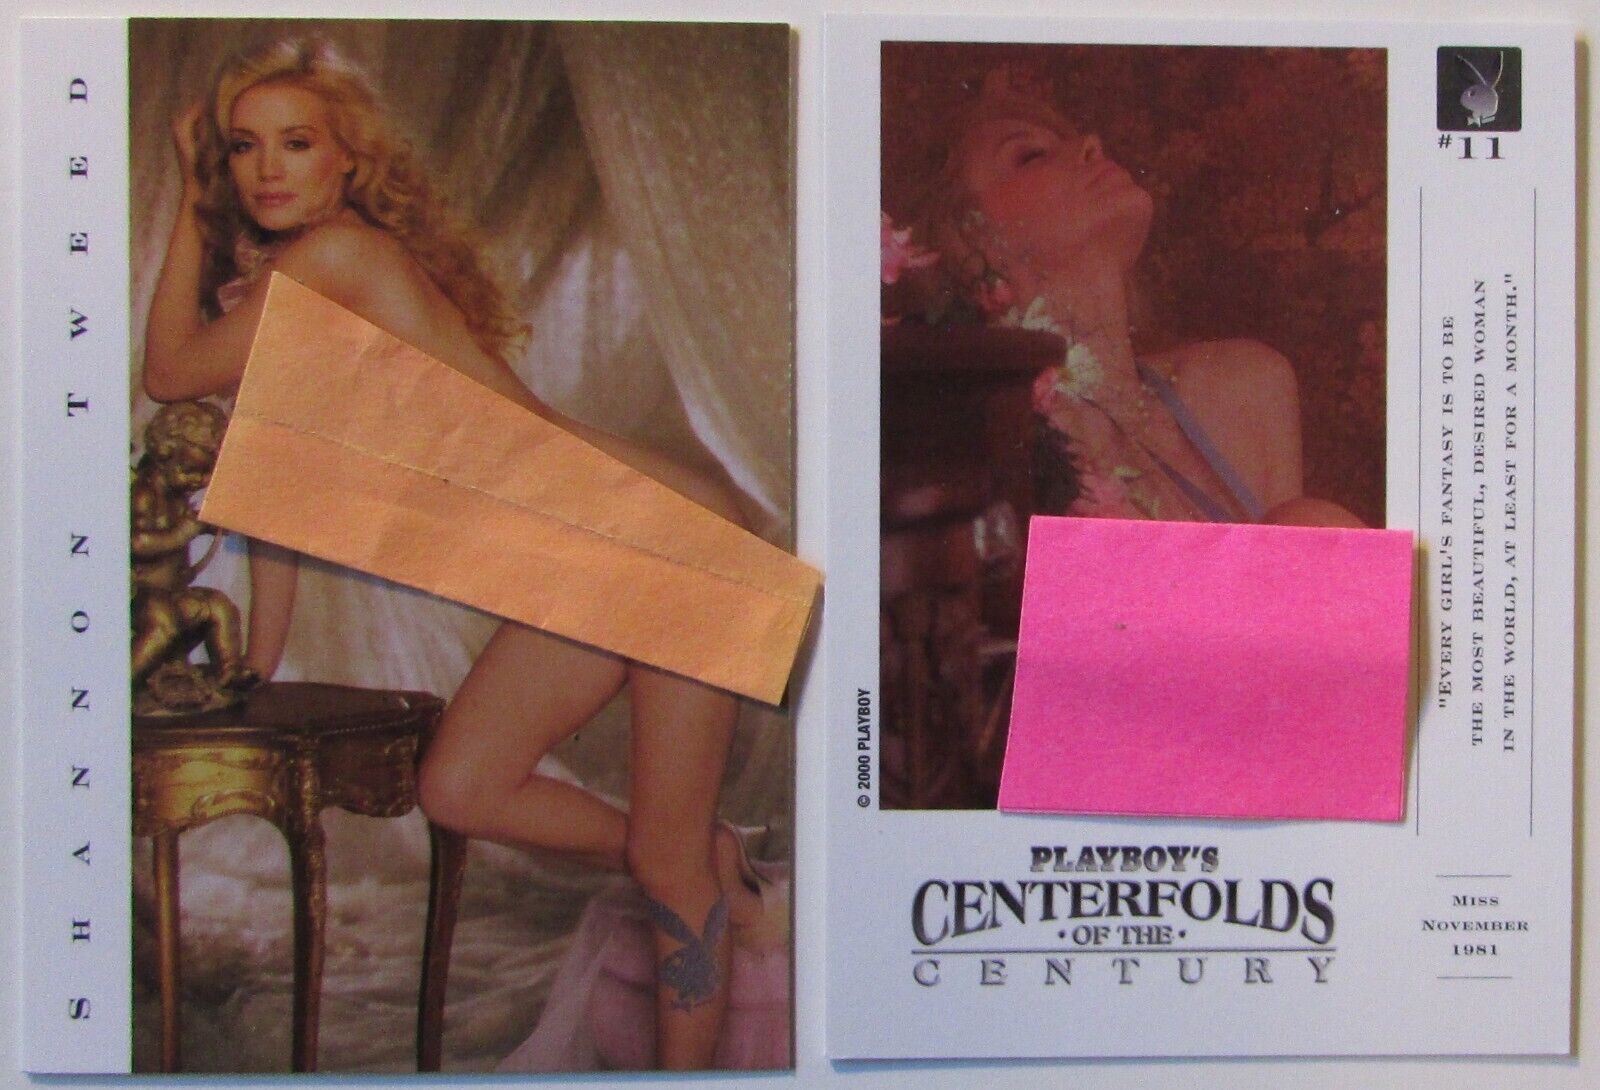 Playboy Centerfolds of the Century collector trading cards sold singly you pick